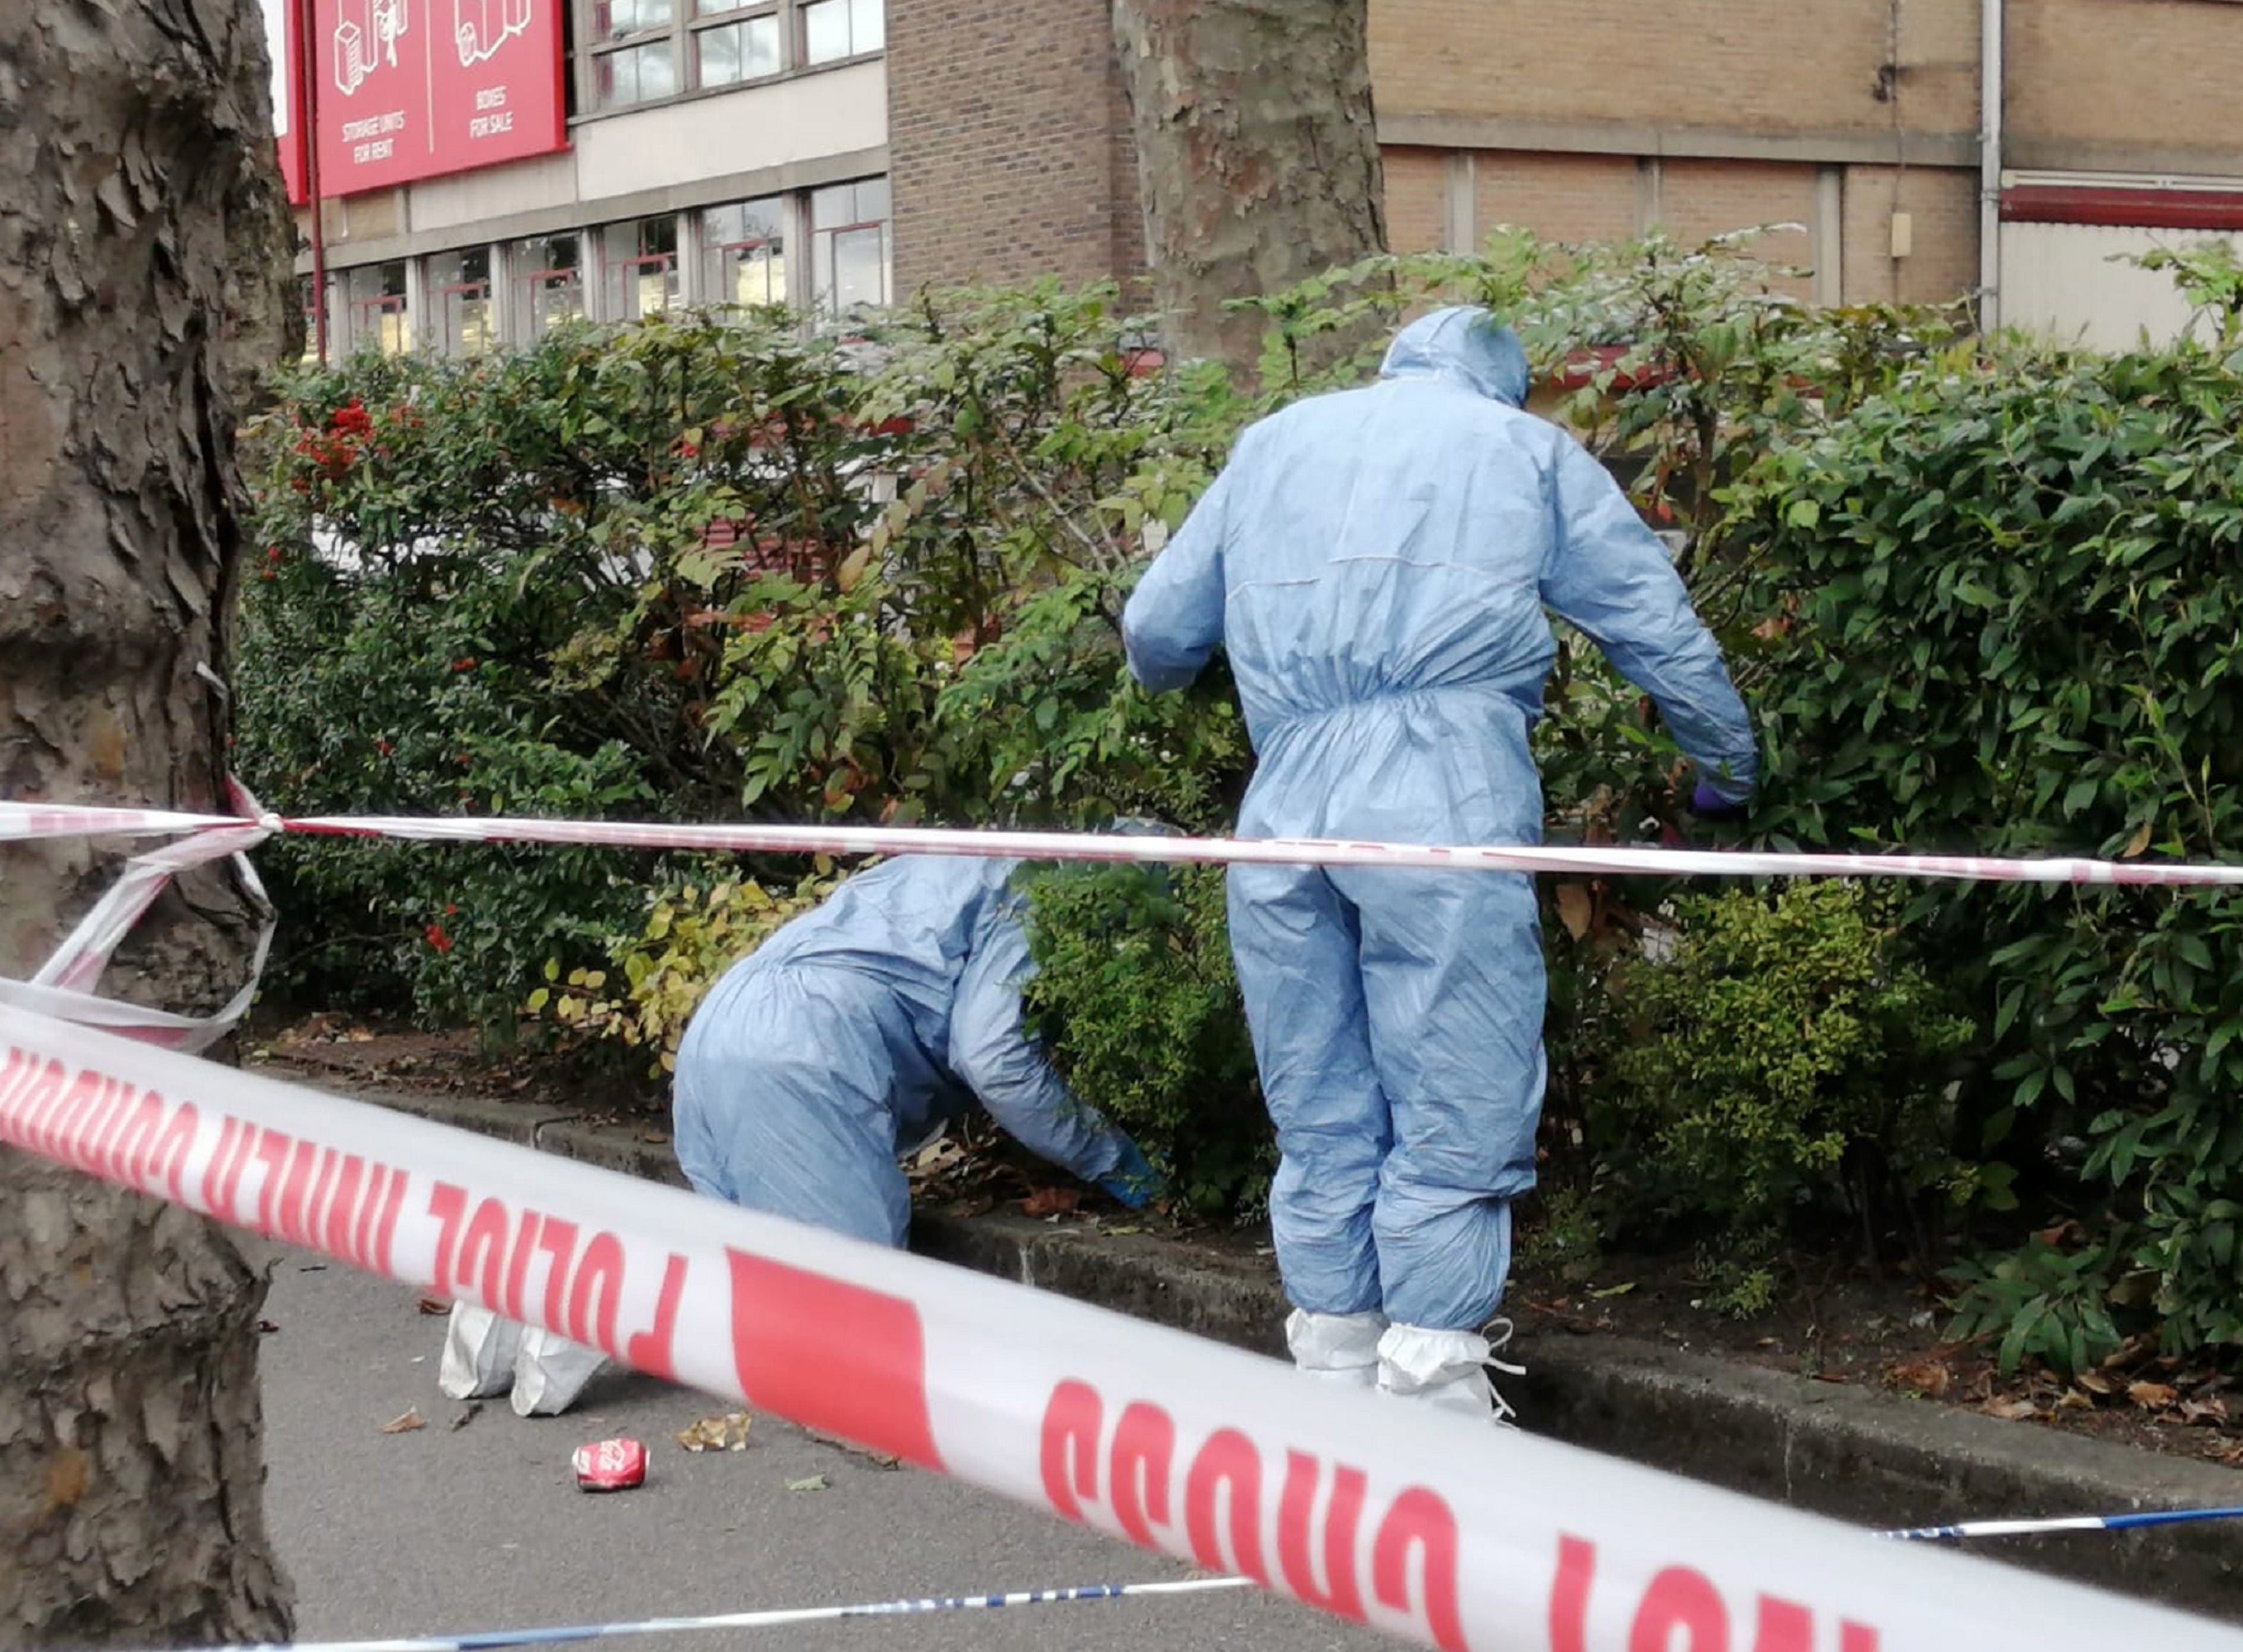 Police search a crime scene in Croydon after the fatal shooting of an officer